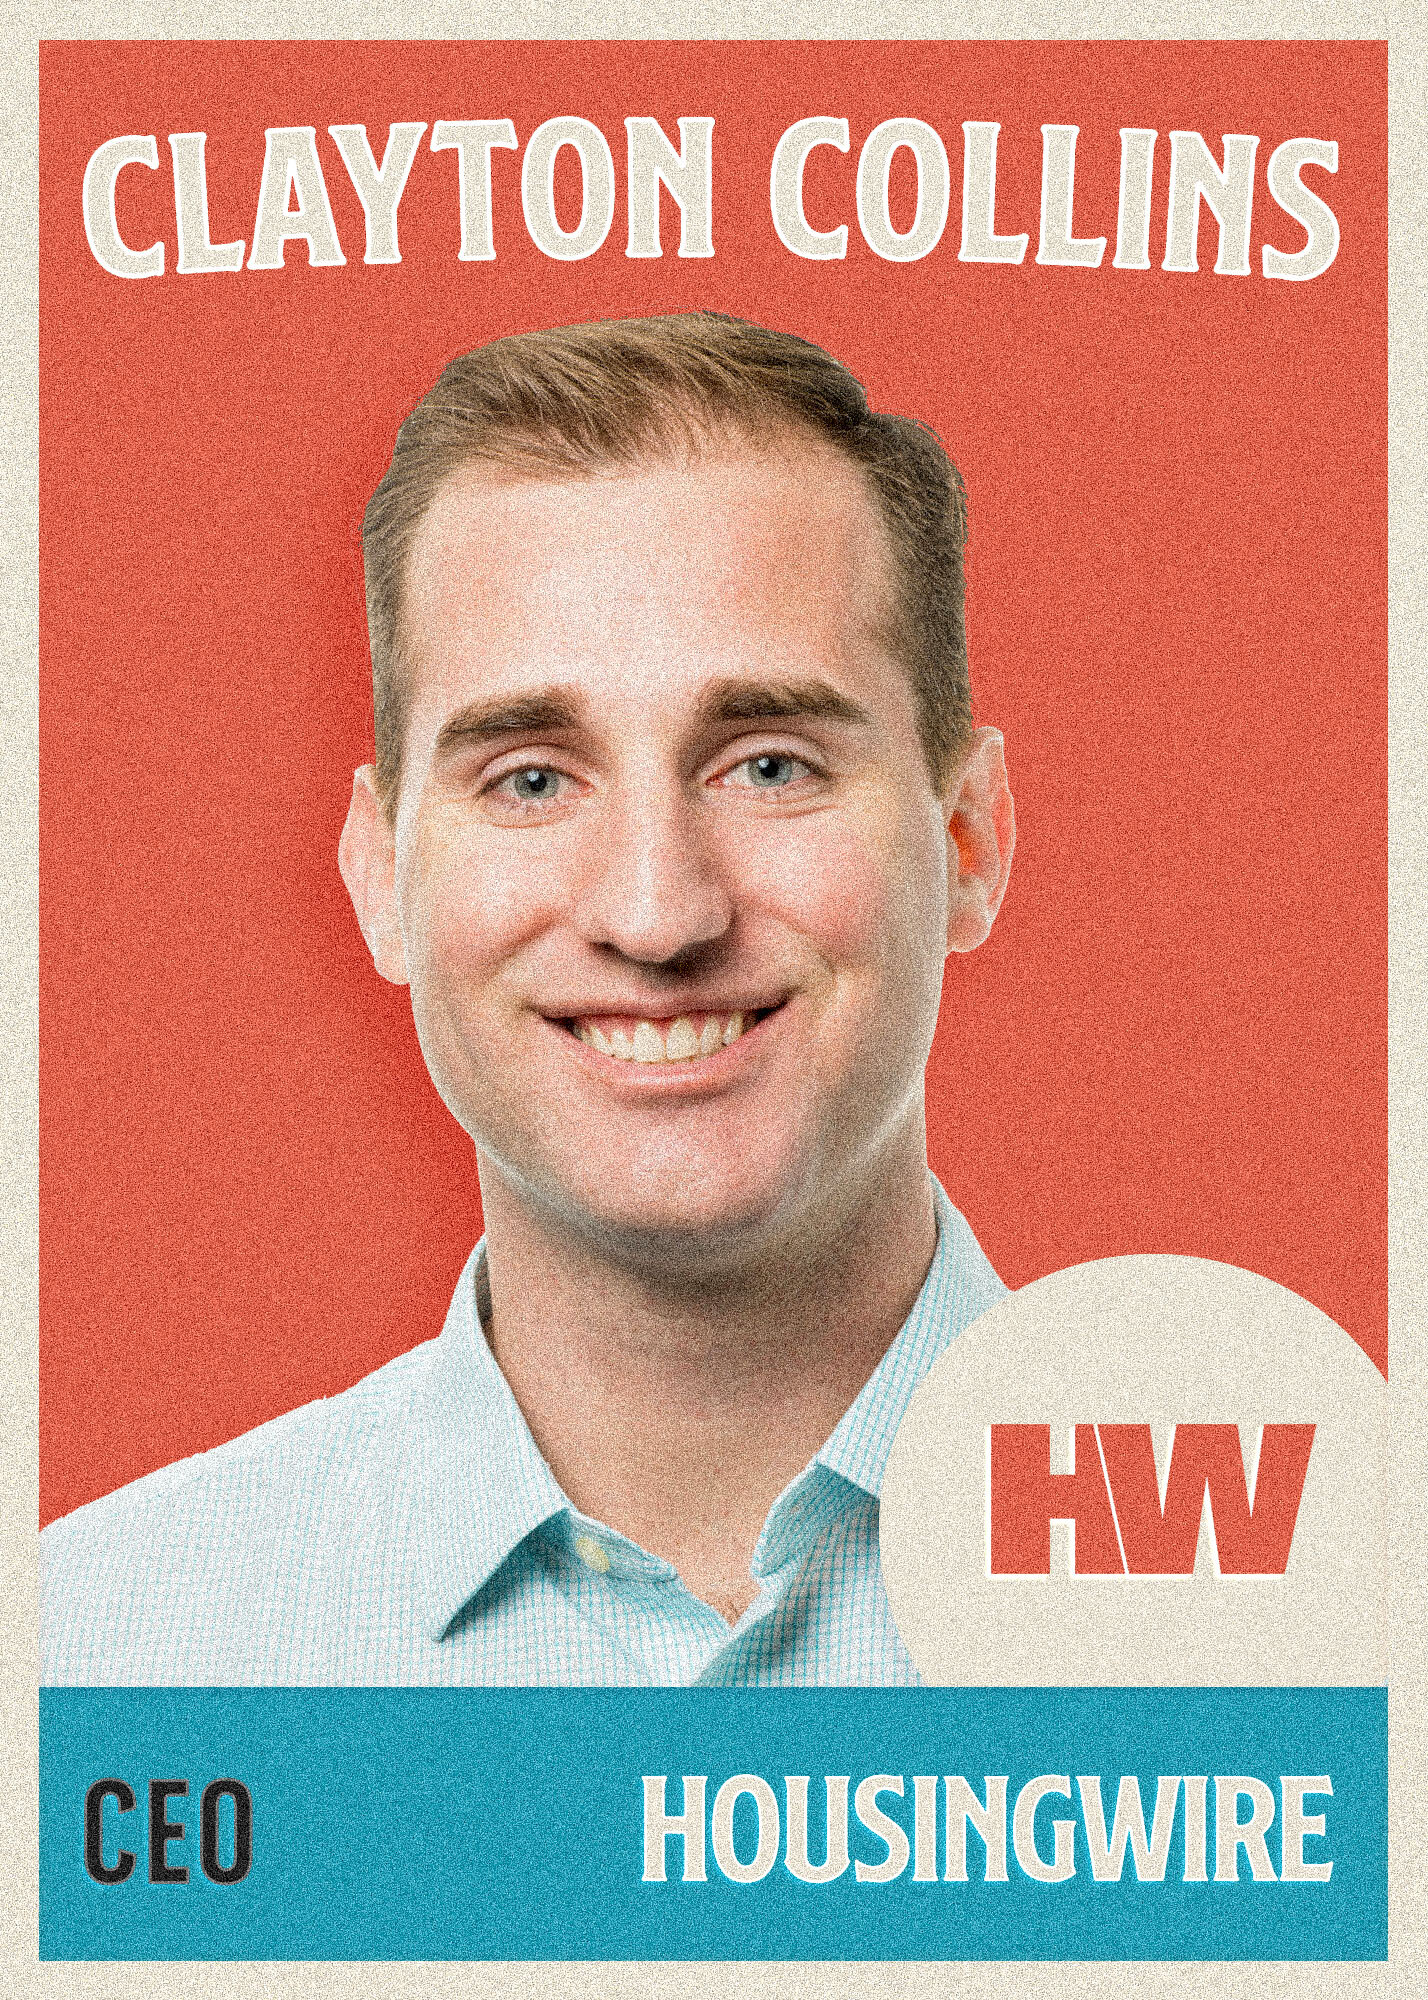 Clayton Collins, CEO of HousingWire